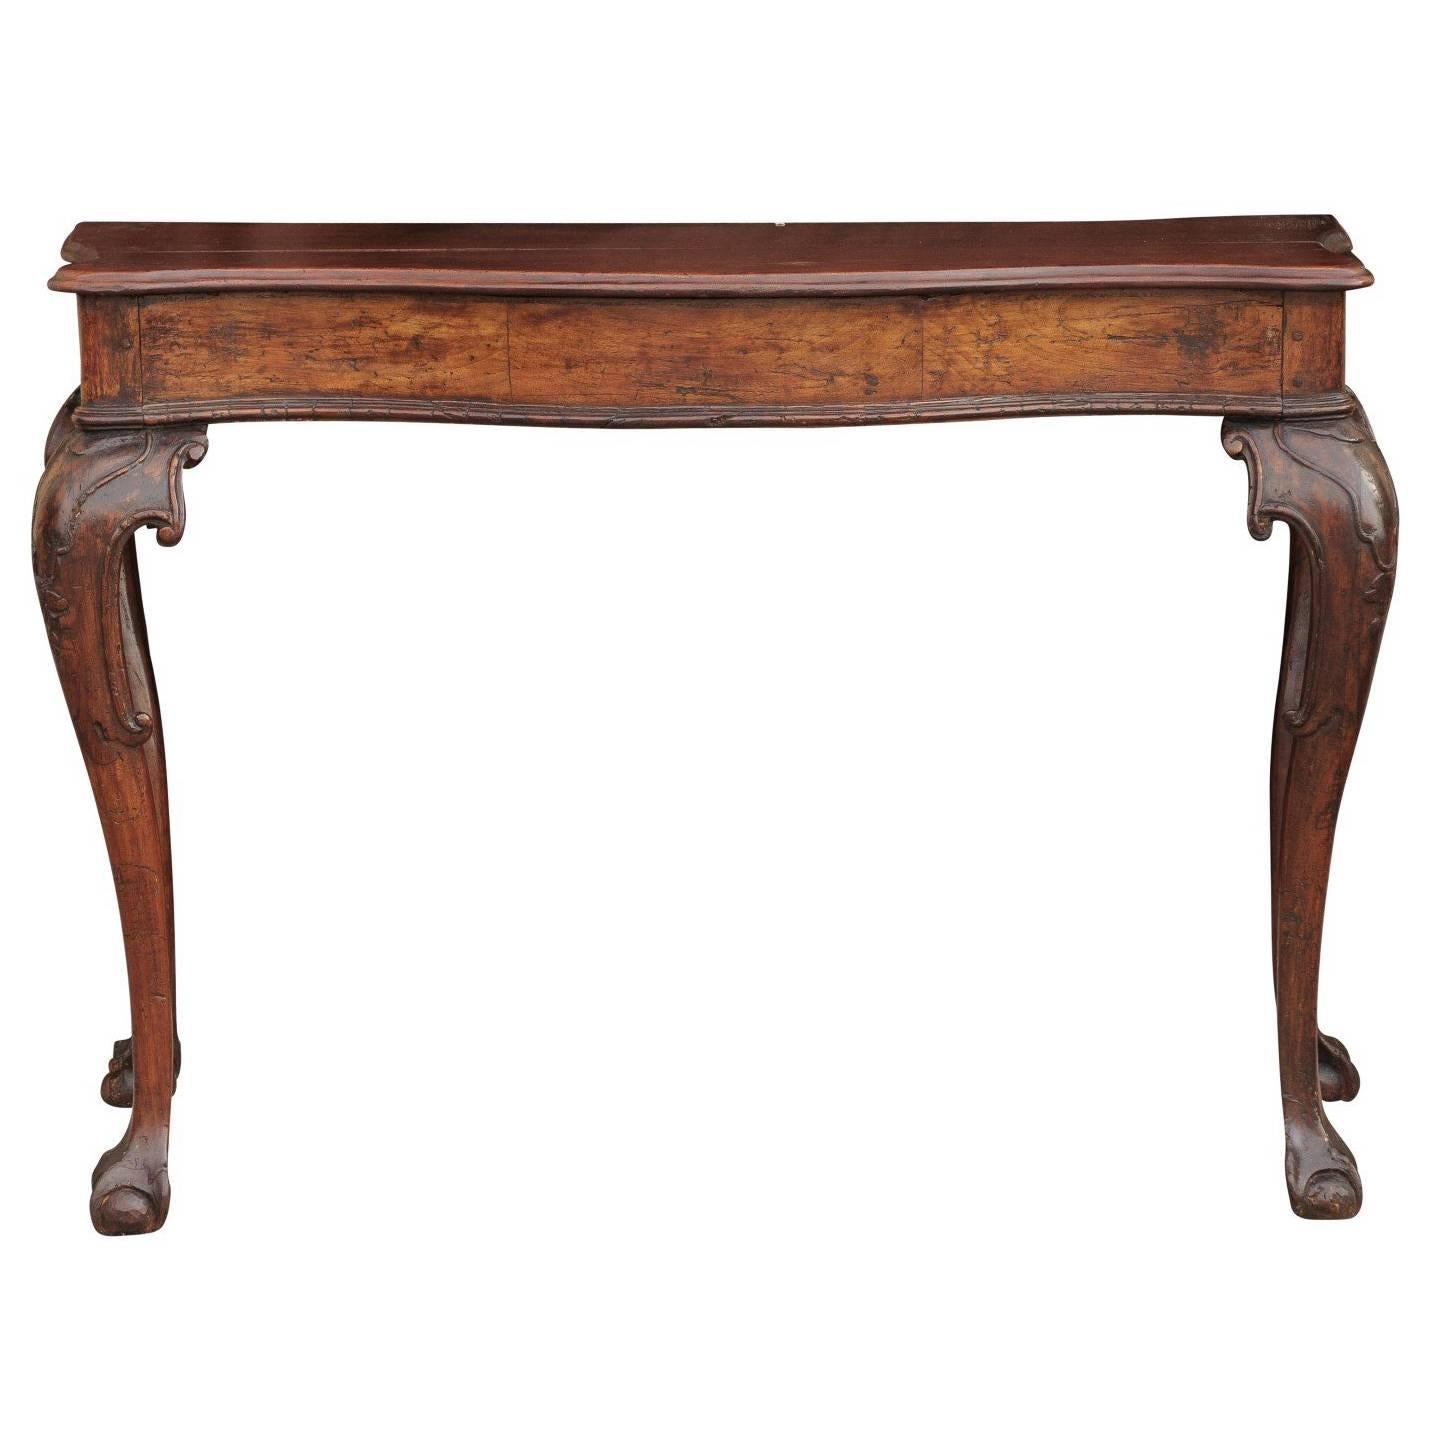 Italian 1790s Rococo Walnut Console Table with Serpentine Front and Carved Legs